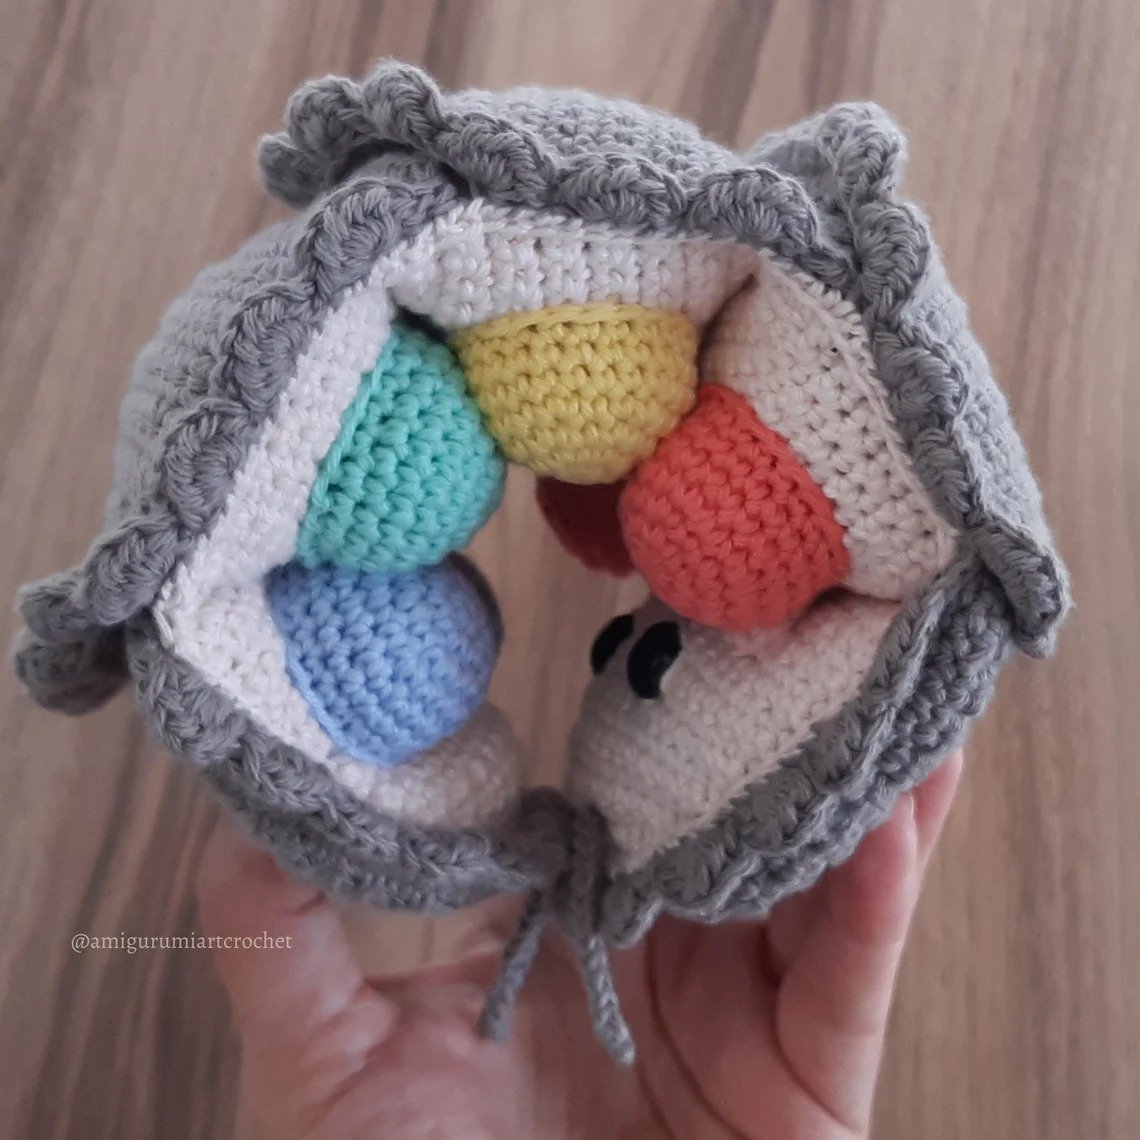 Pillbug, Roly-Poly, Potato Bug ... No Matter What YOU Call It, We All Crochet Them The Same ...